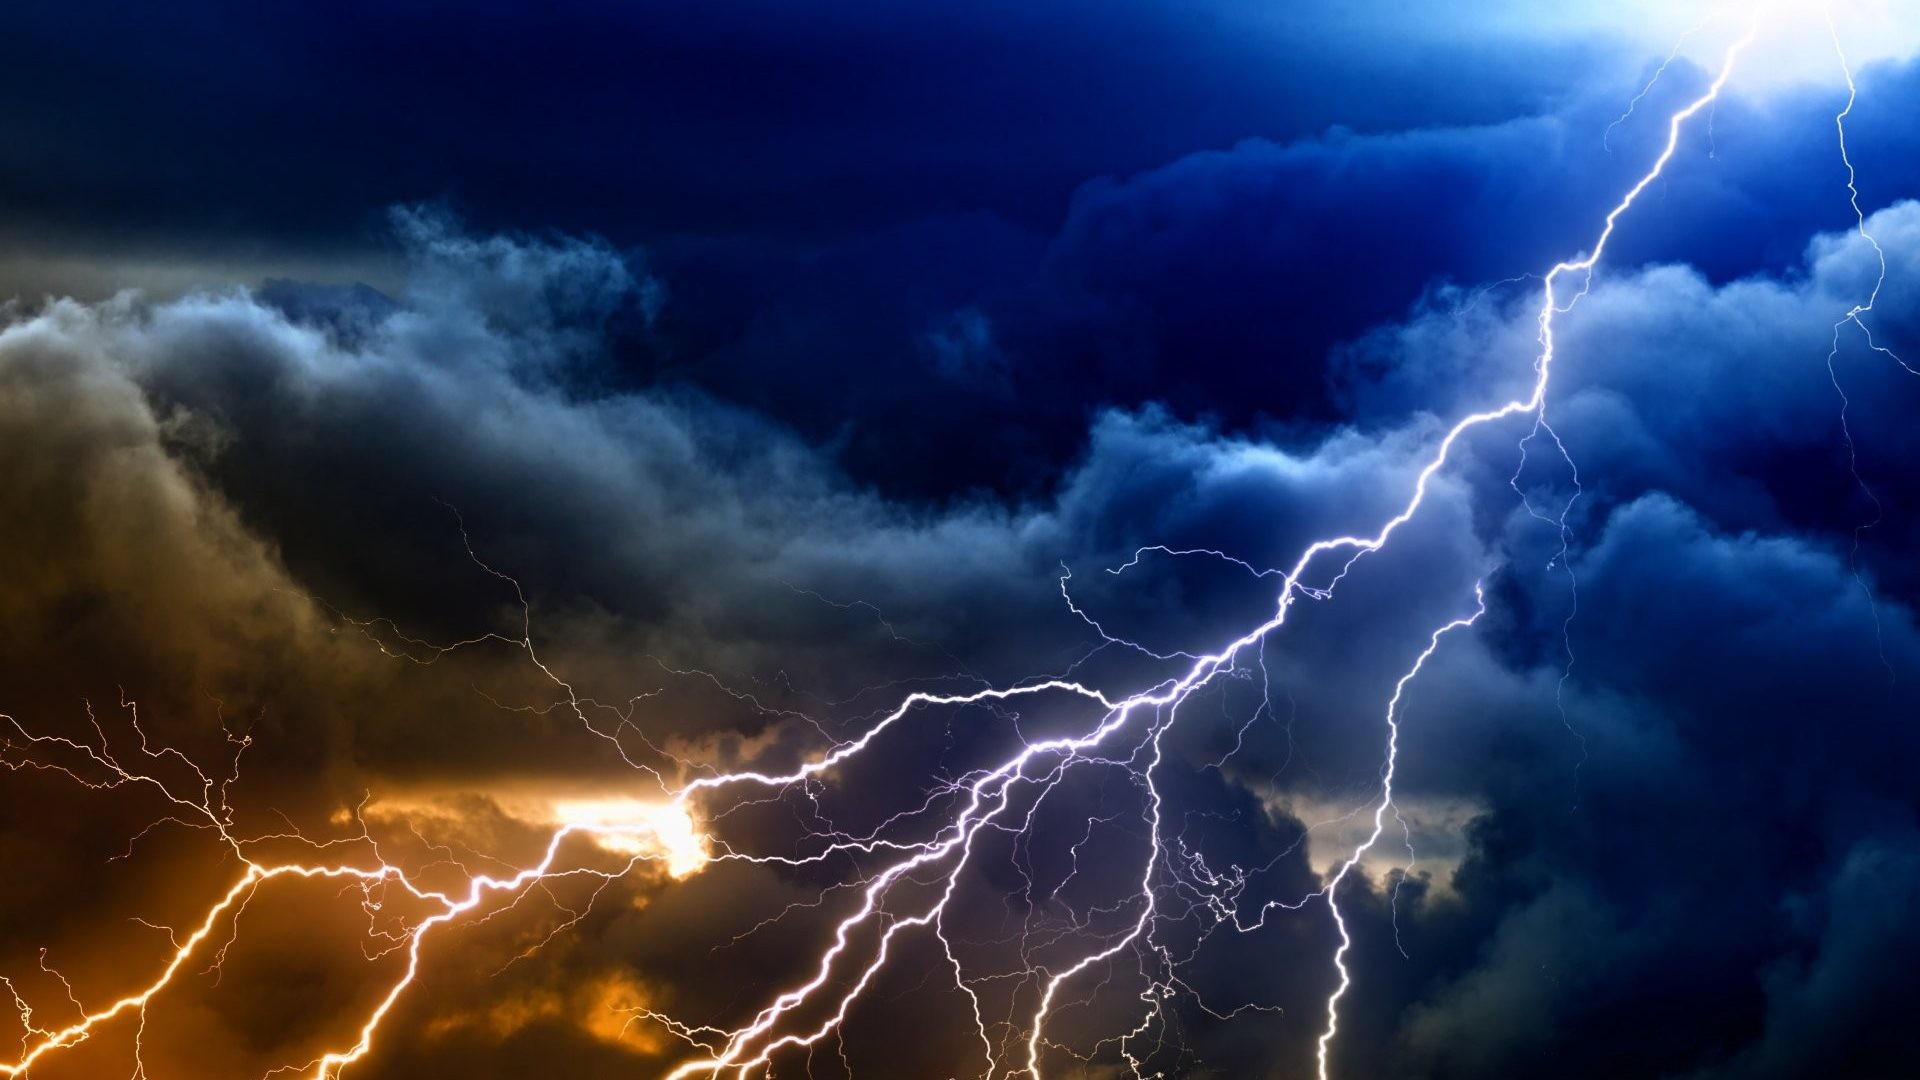 1920x1080 Download Lightning Sky Rain Nature Storm Clouds Thunderstorm Hd Wallpaper  For Android Phone